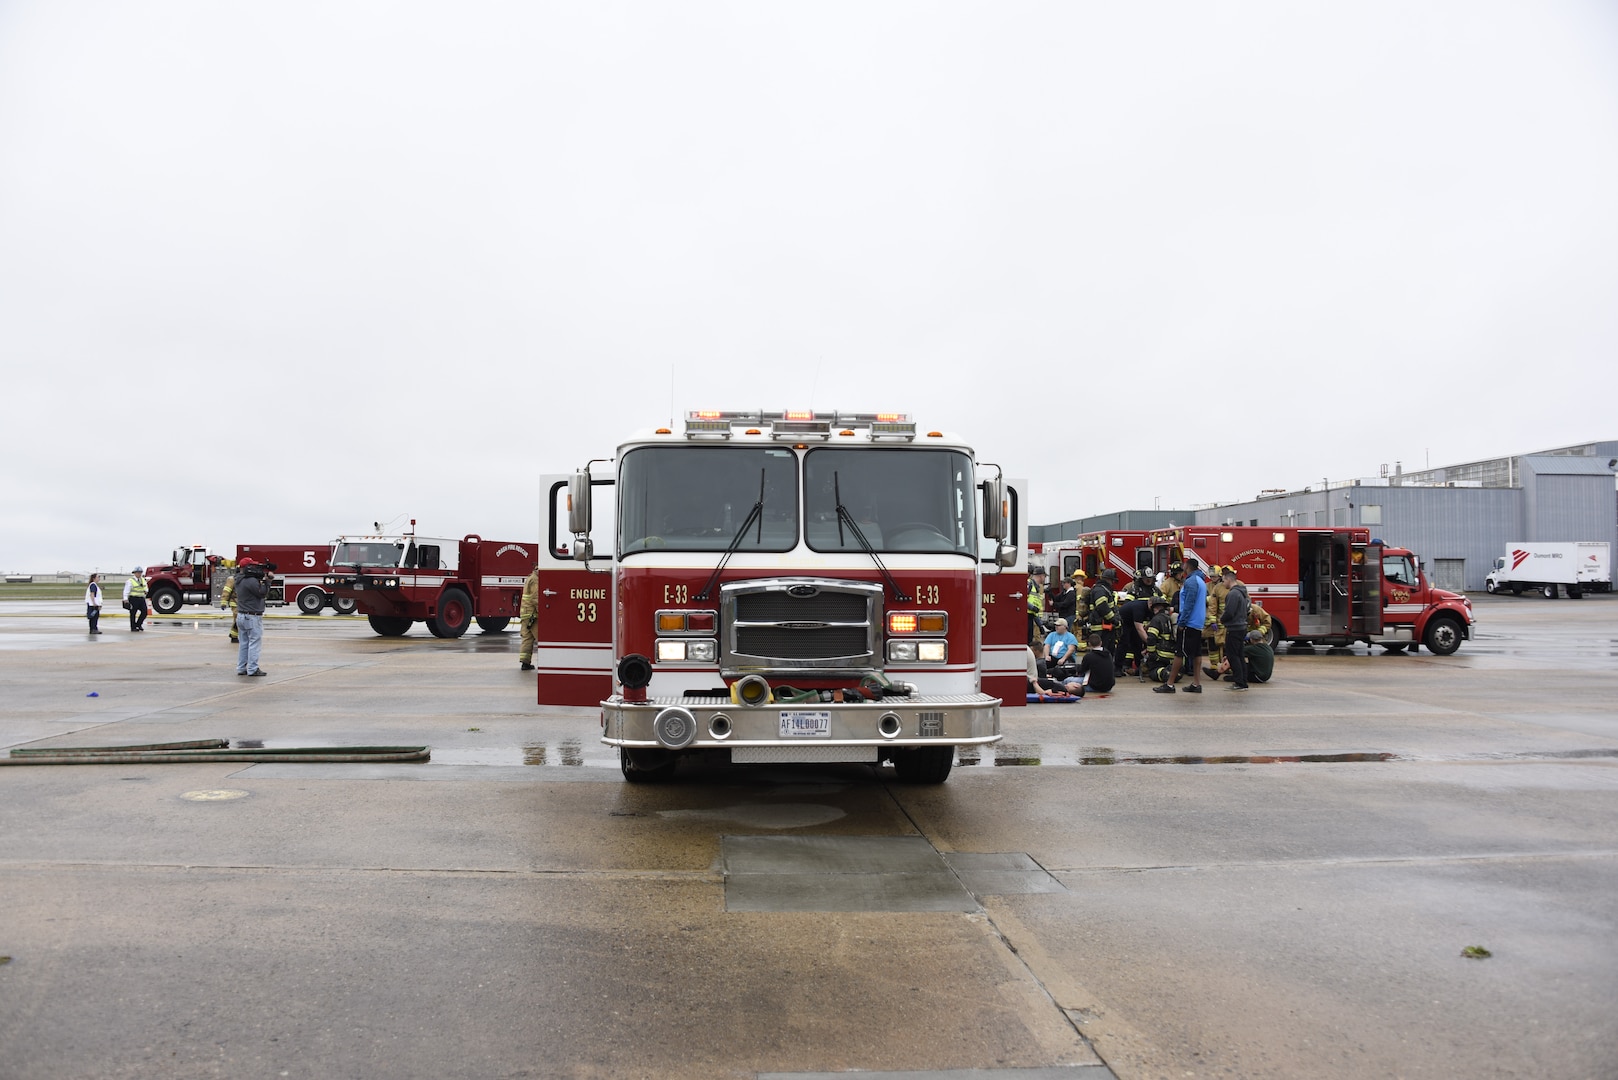 First response vehicles respond during Operation Blue Skywalker, April 10, 2019 at Delaware National Guard Base, Del. The 166th Civil Engineer Squadron Firefighters have an agreement with local authorities to assist in responding any time they are needed. (U.S. Air Force photo by Mr. Mitch Topal)